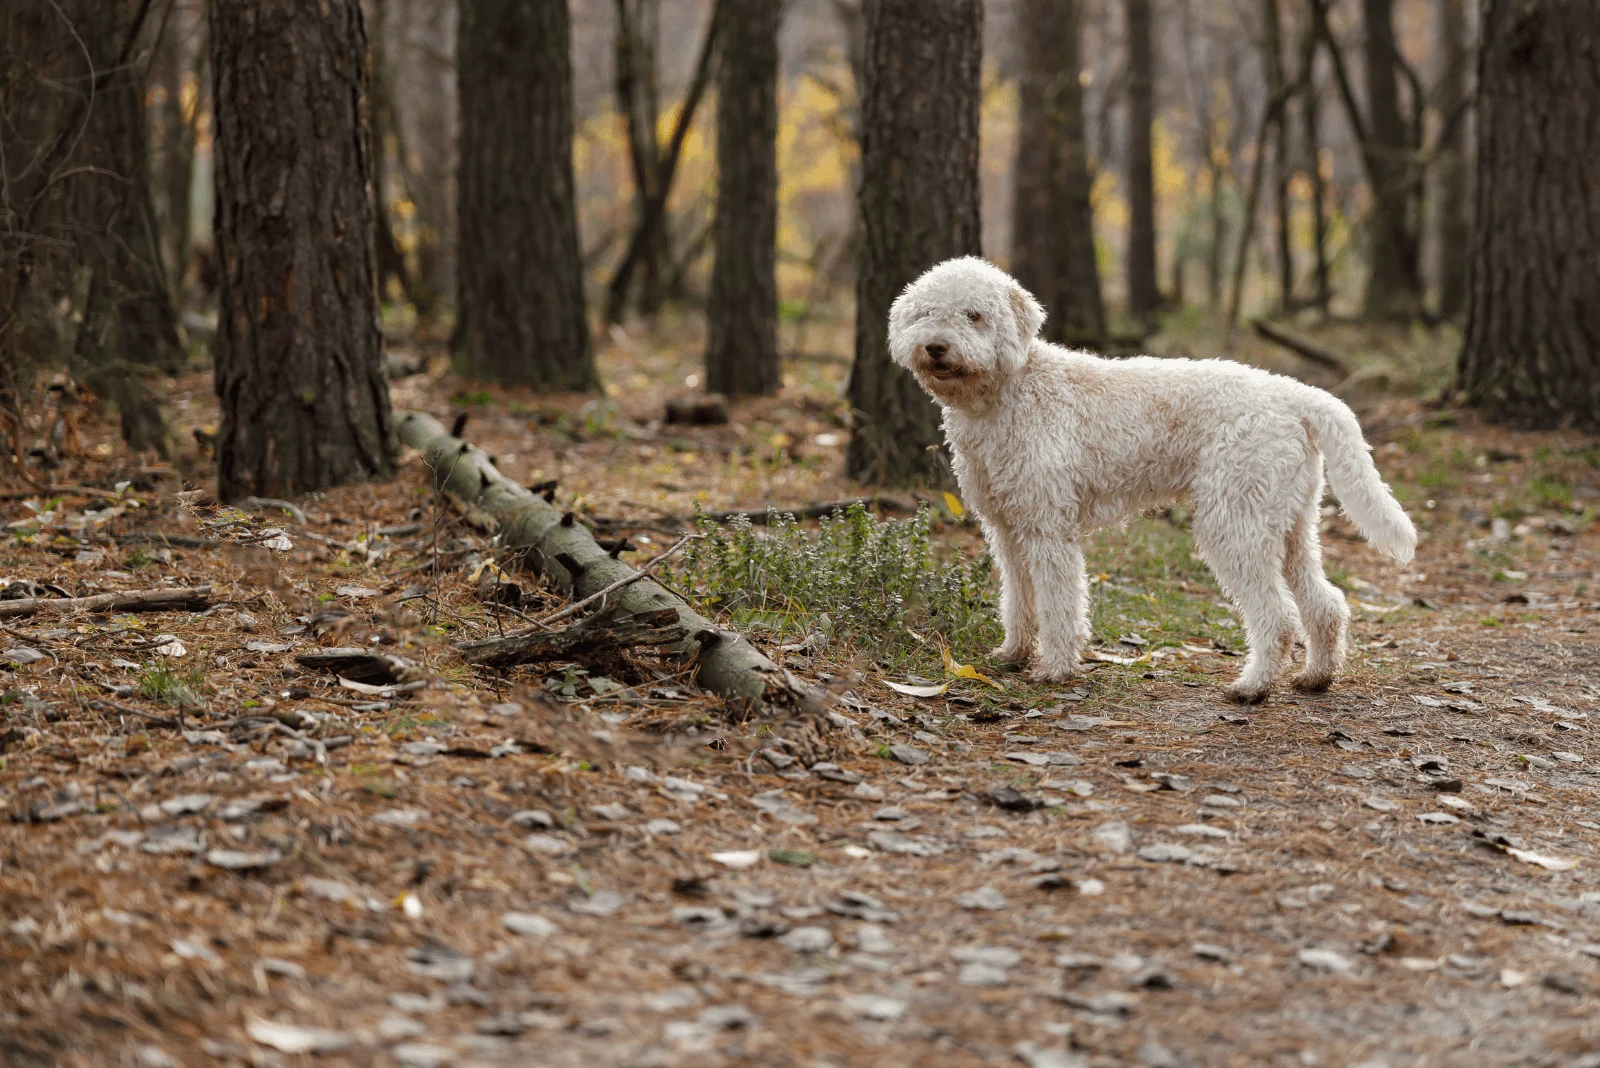 White Lagotto Romagnolo stands in the forest